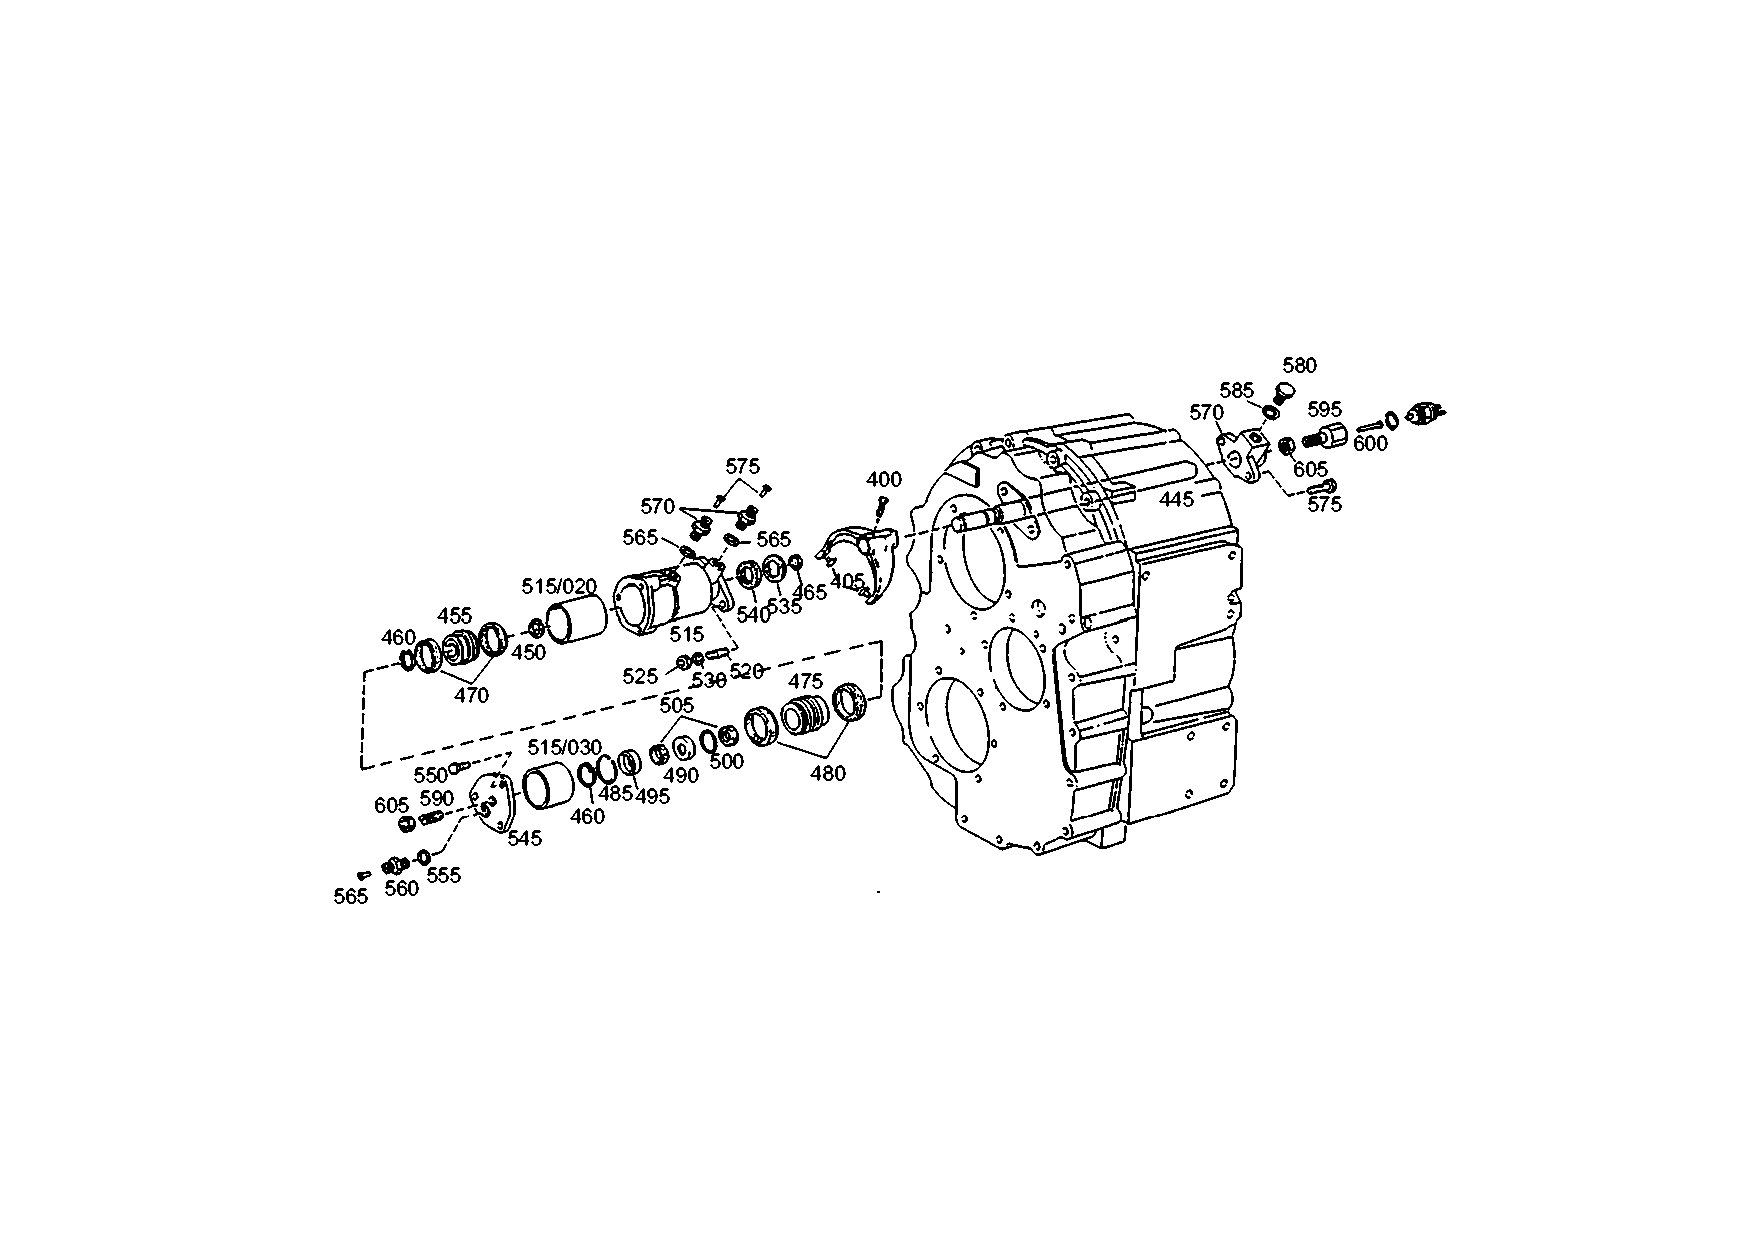 drawing for TEREX EQUIPMENT LIMITED A5638910 - FLANGE (figure 4)